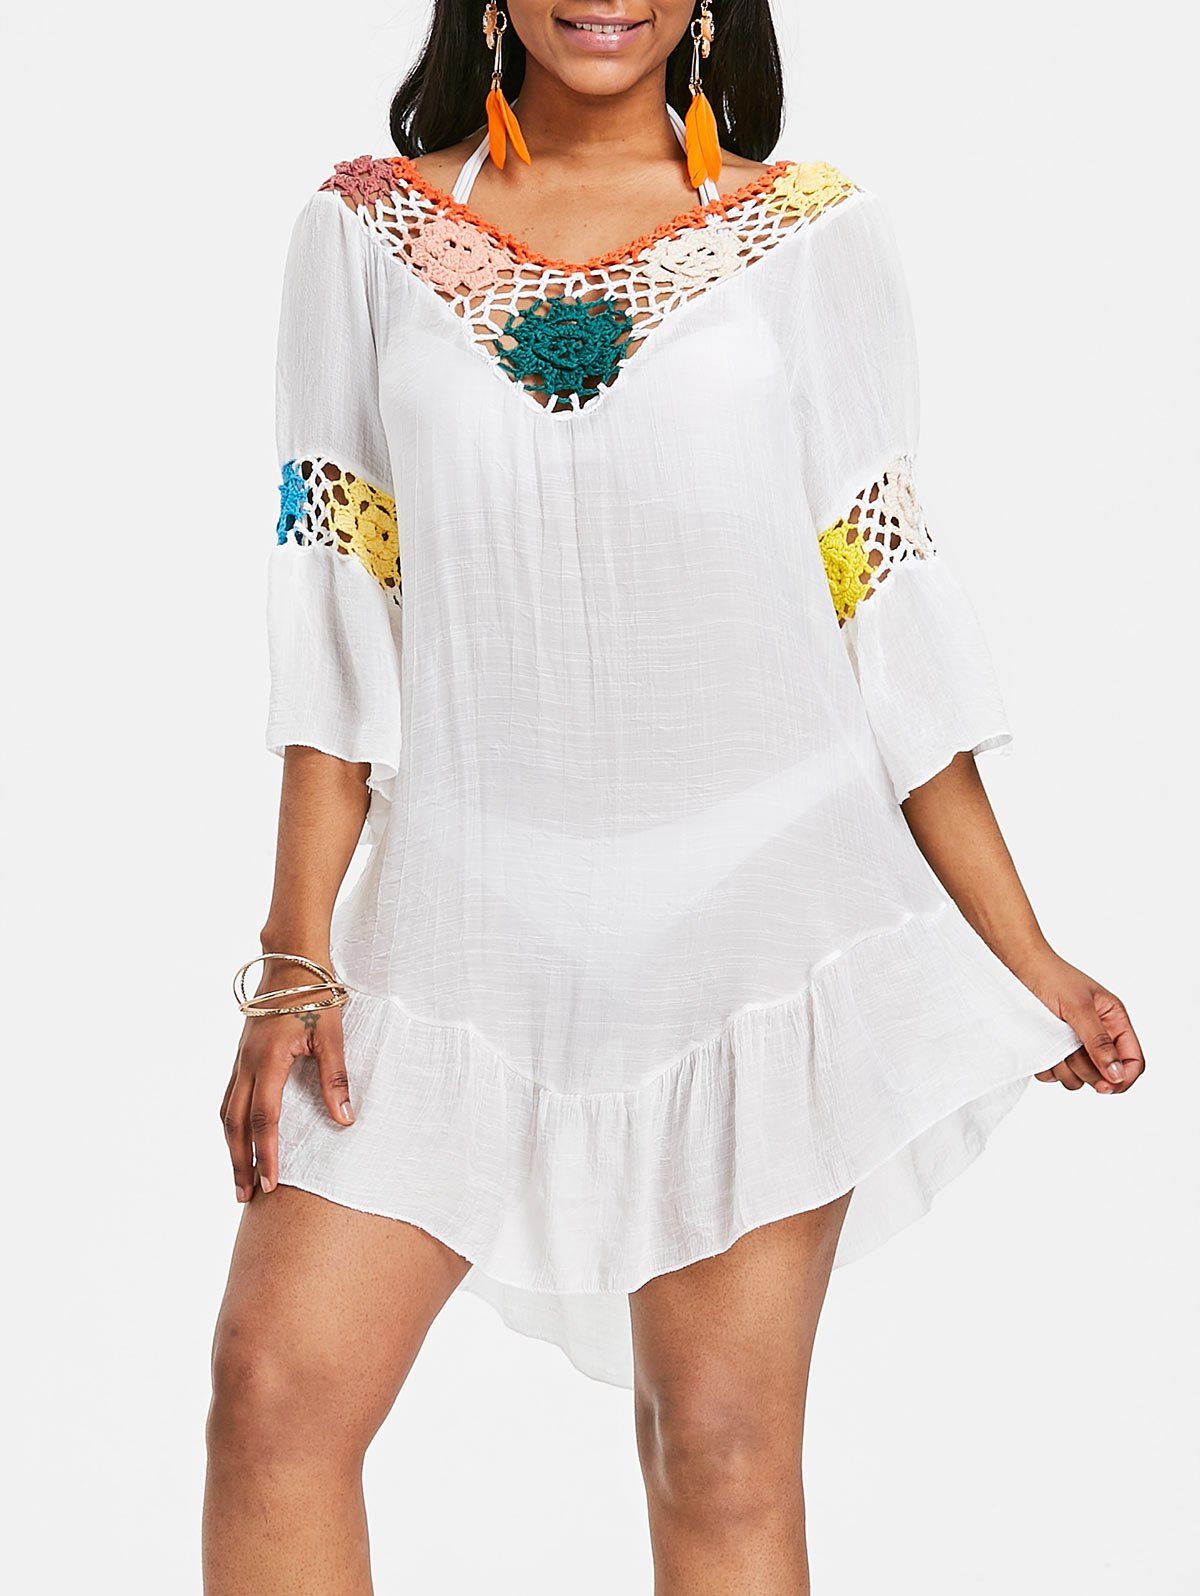 Fashion Backless Flounce Crochet Insert Tunic Cover Up  